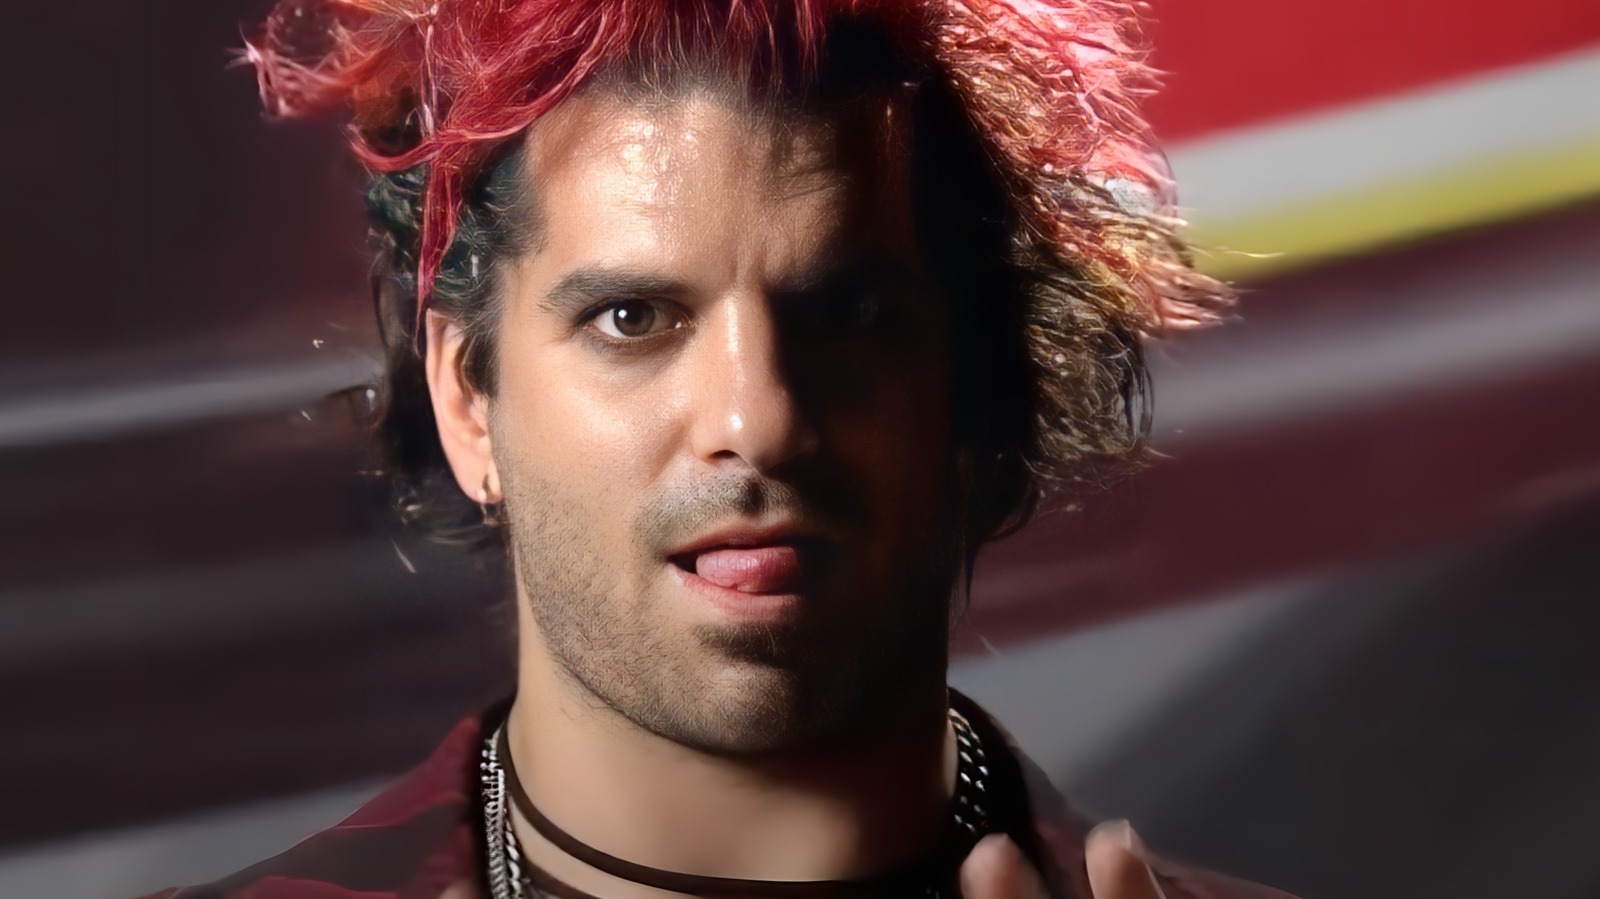 Jimmy Jacobs Reportedly Backstage At AEW Dynamite, Could Be Helping With Creative